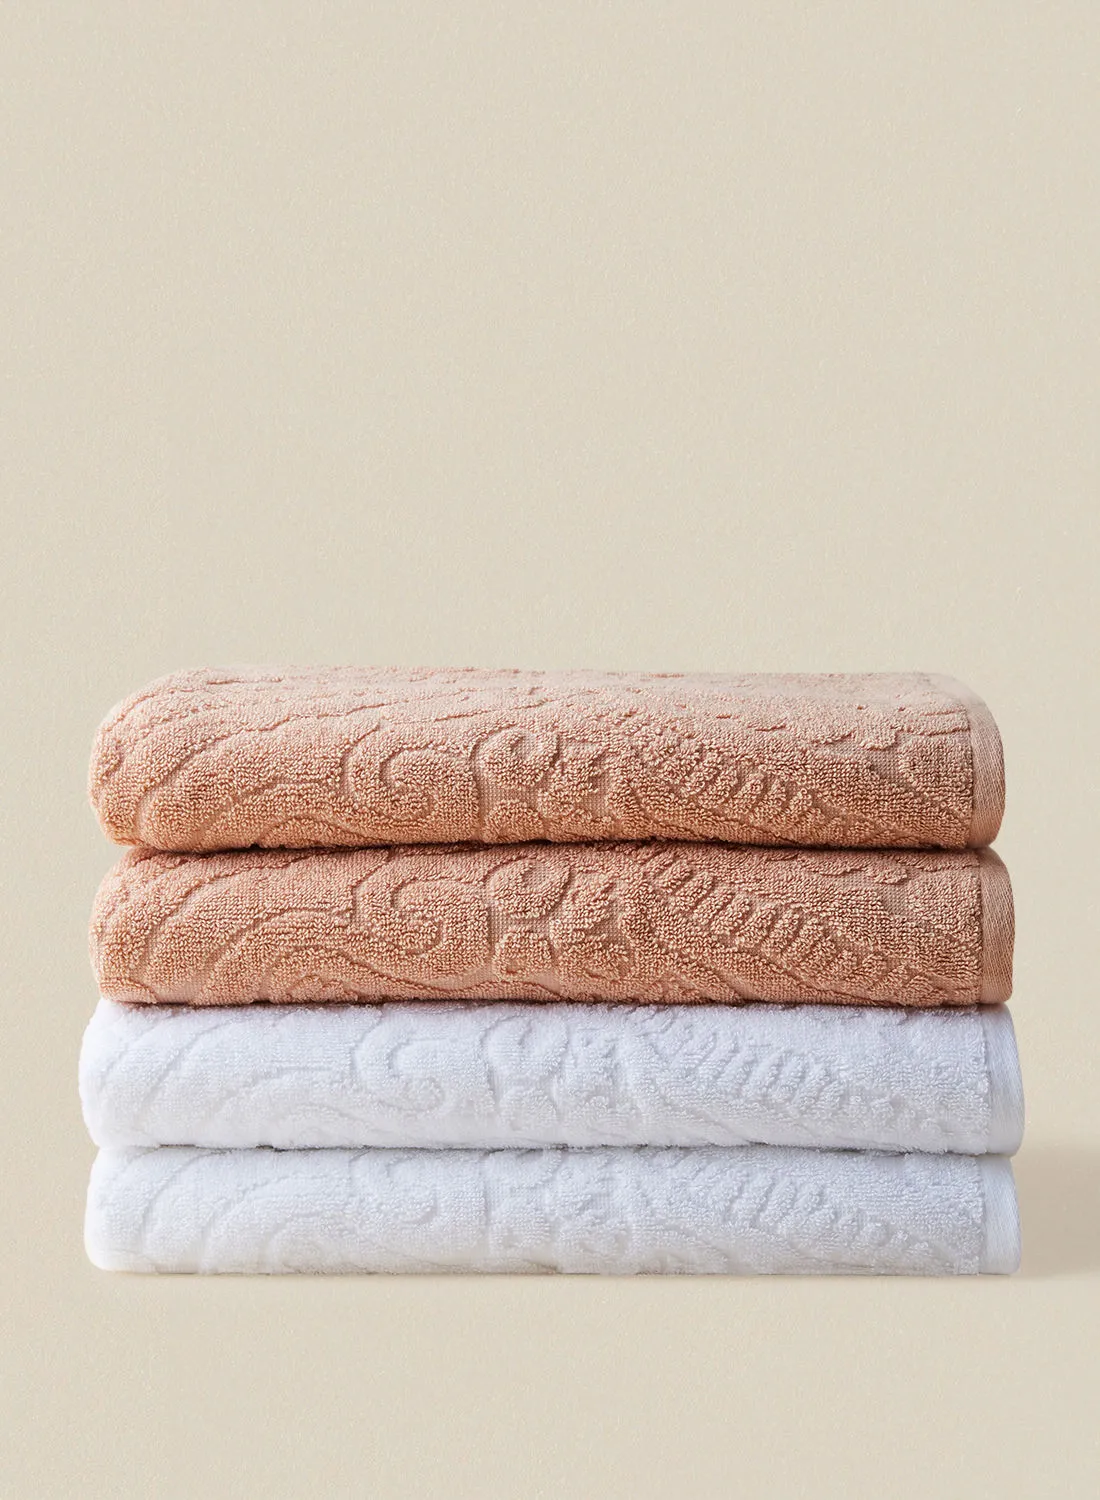 noon east 4 Piece Bathroom Towel Set - 500 GSM 100% Cotton - 4 Bath Towel - Multicolor White/Ginger Color - Highly Absorbent - Fast Dry